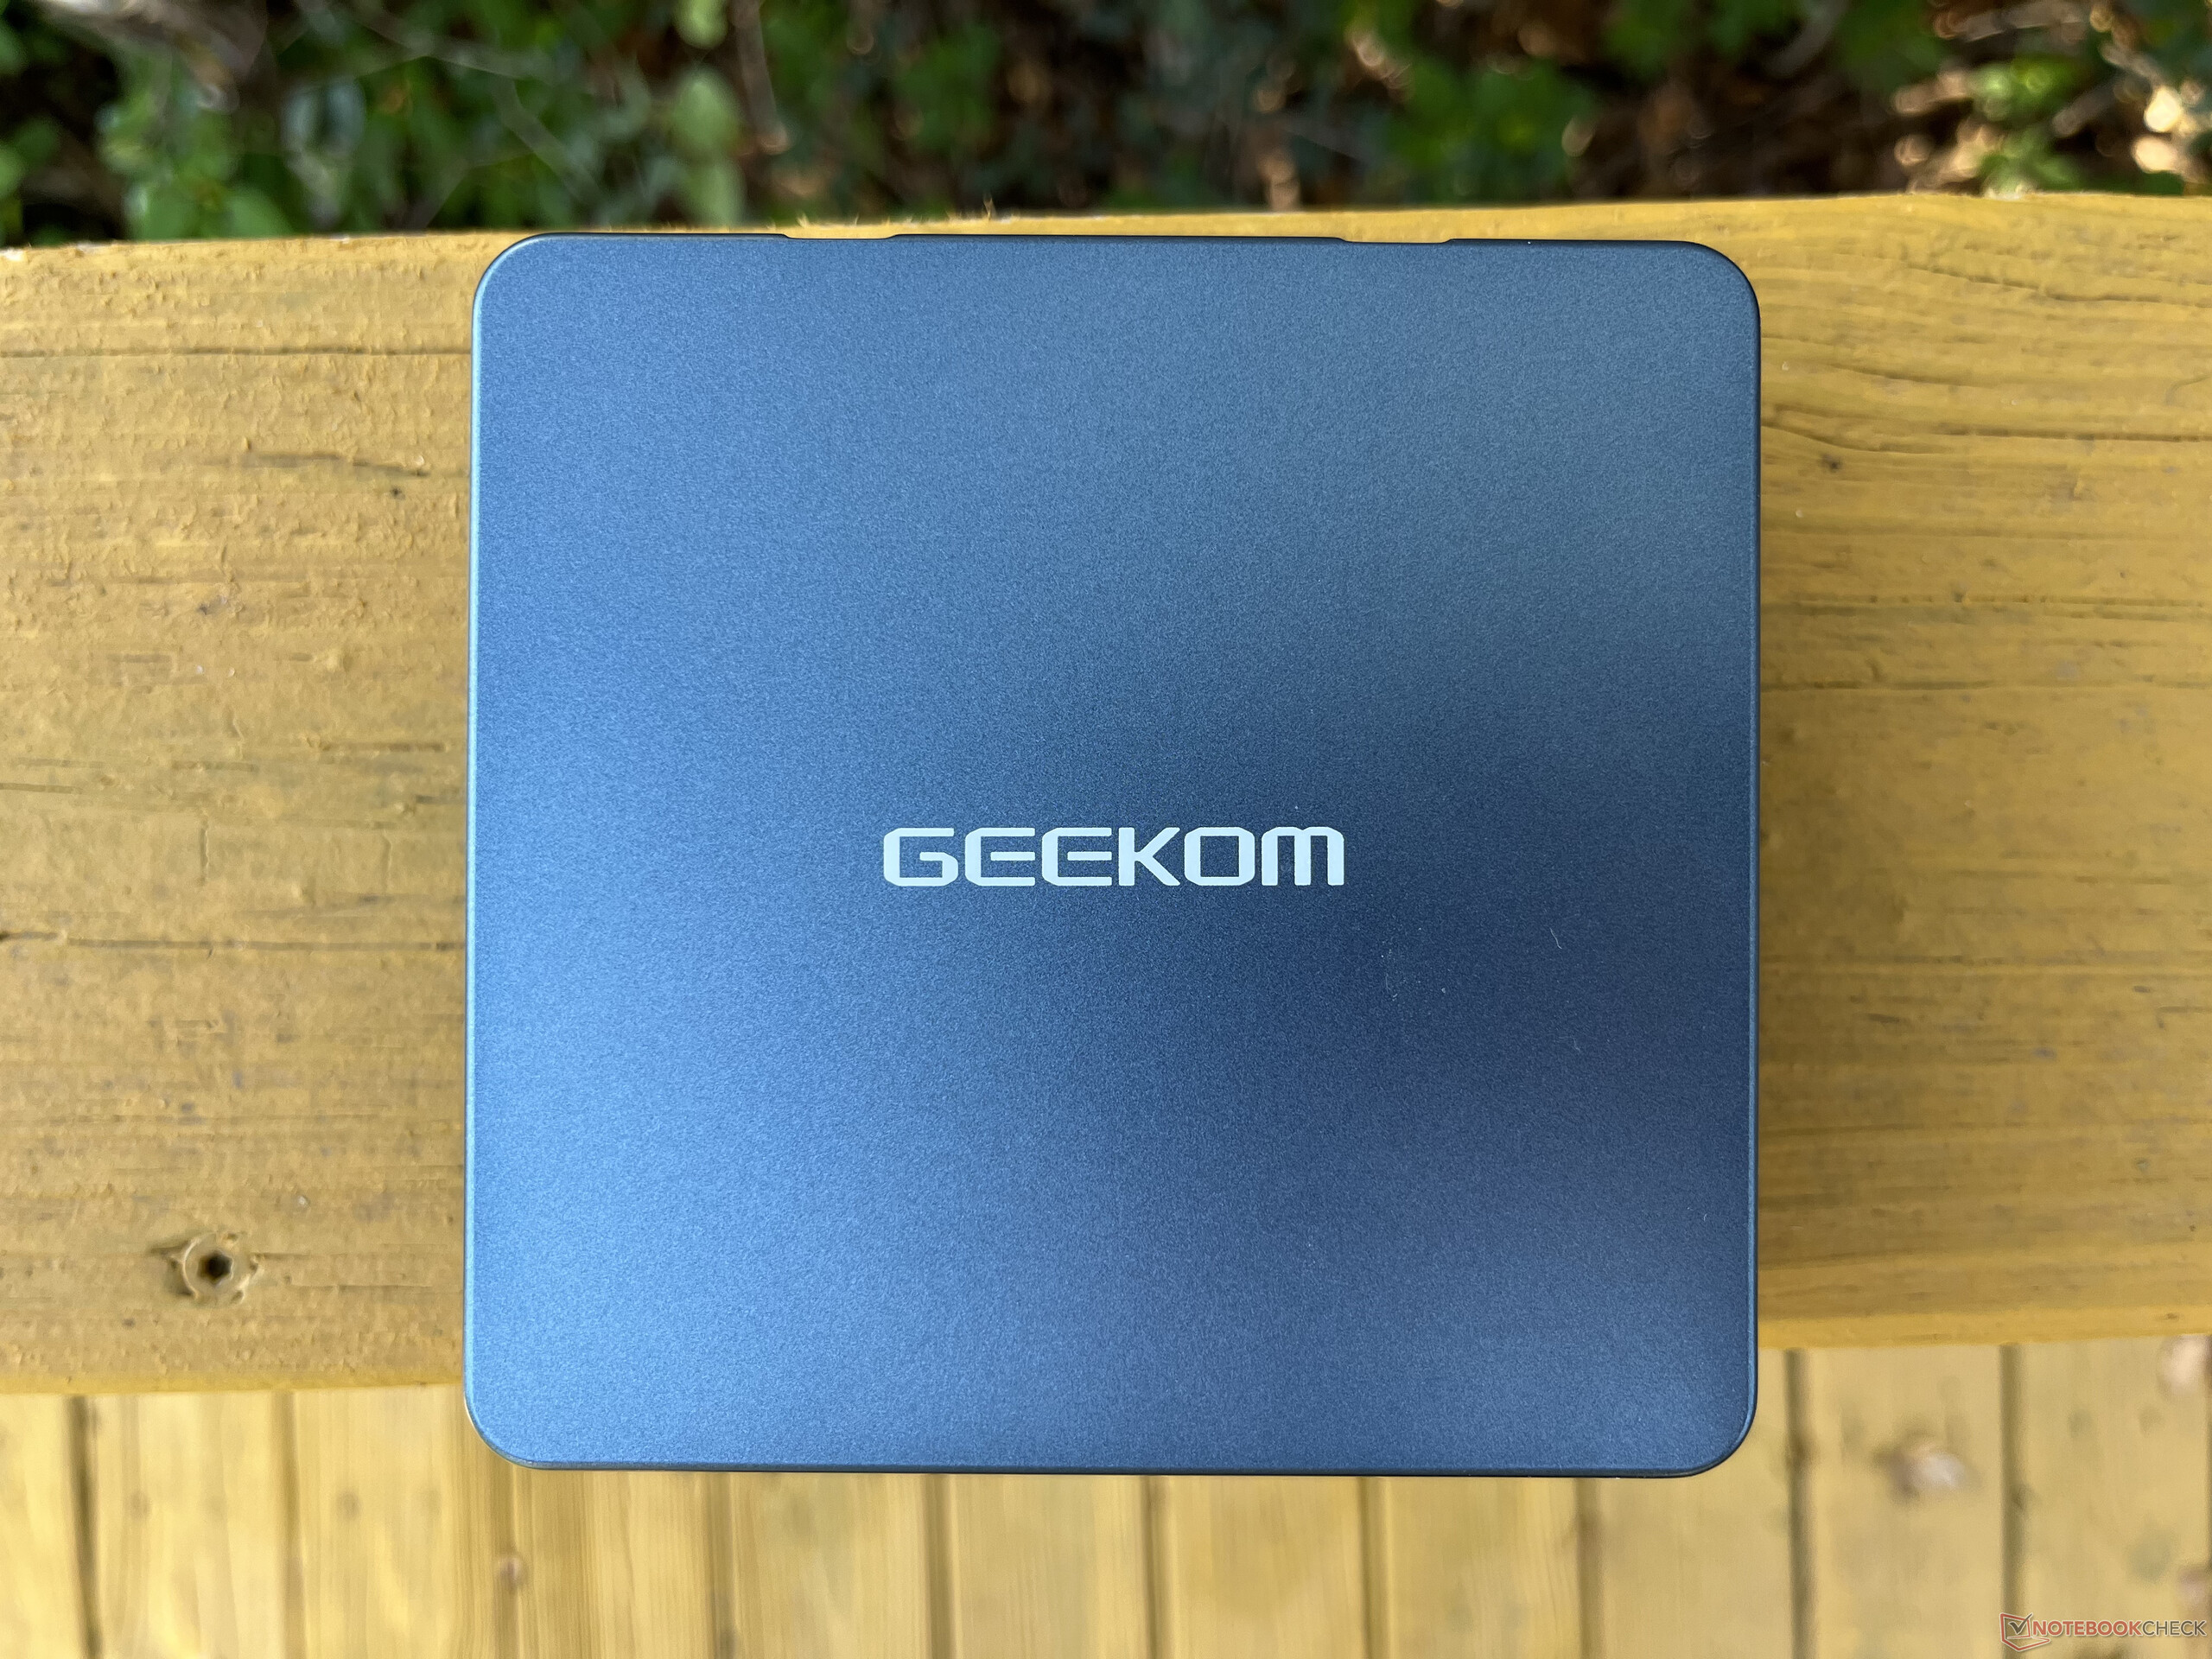 GEEKOM IT13 Mini PC Review - A $789 USD Tiny PC with an Intel Core i9it  has some shortcomings. 